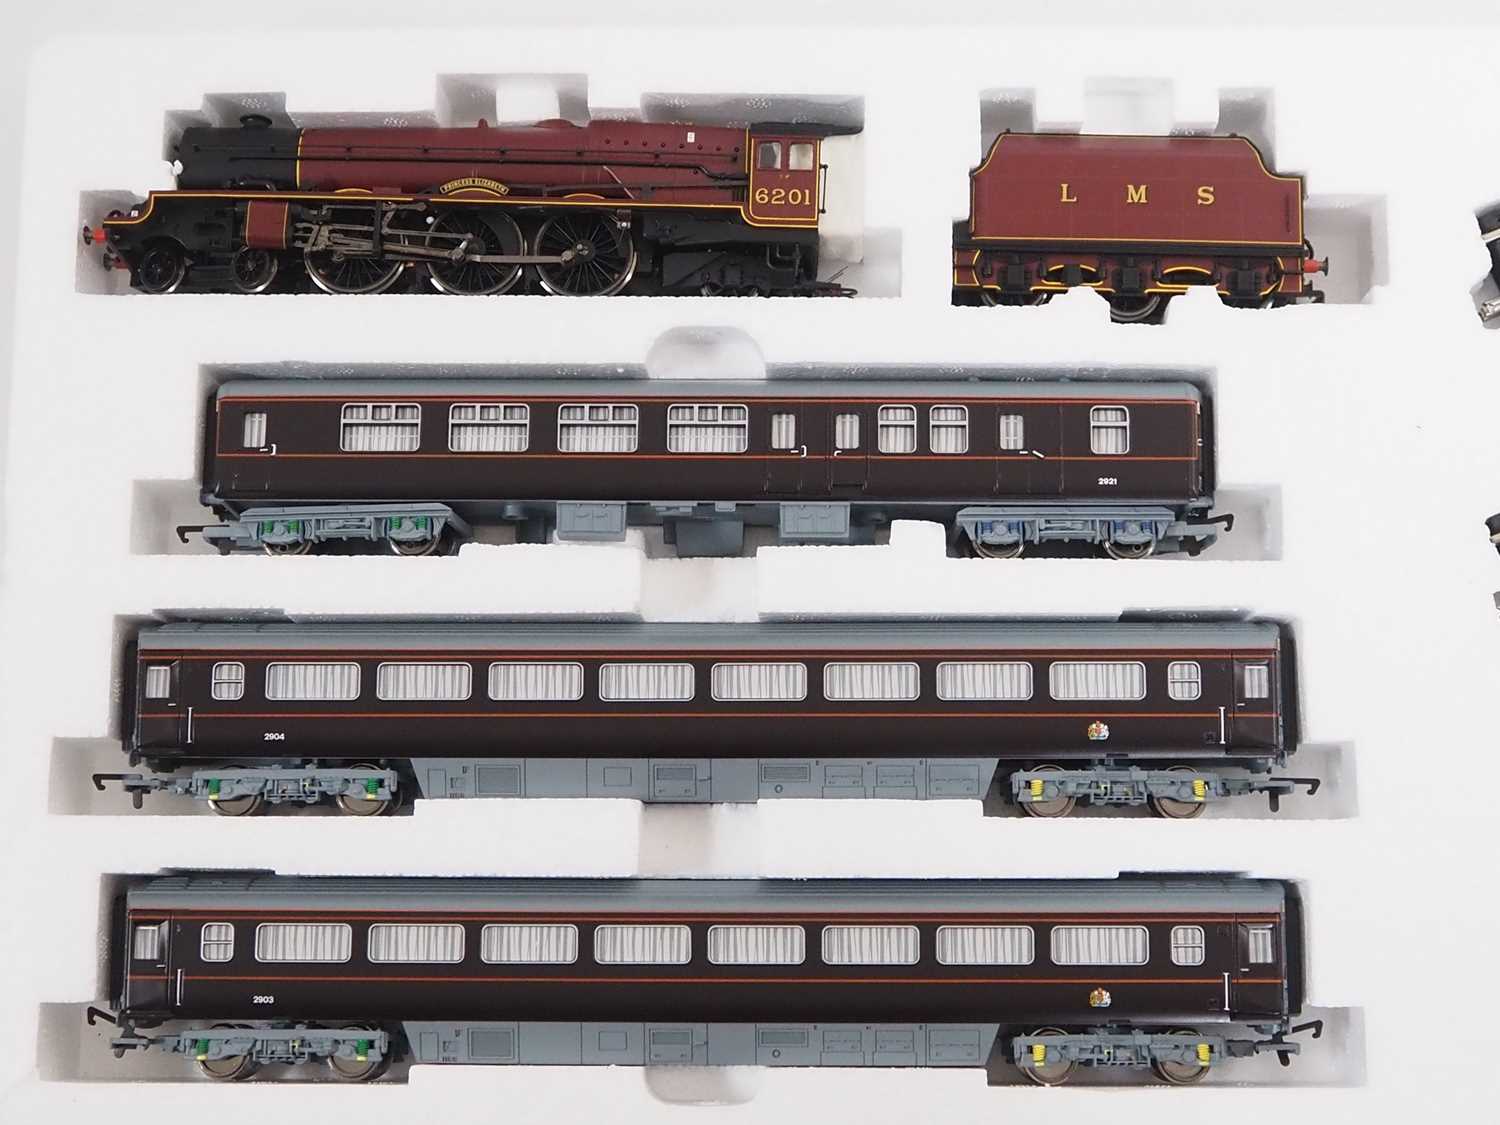 A HORNBY OO gauge Marks & Spencer limited edition 'The Royal Train' train set, appears unused and - Image 3 of 5